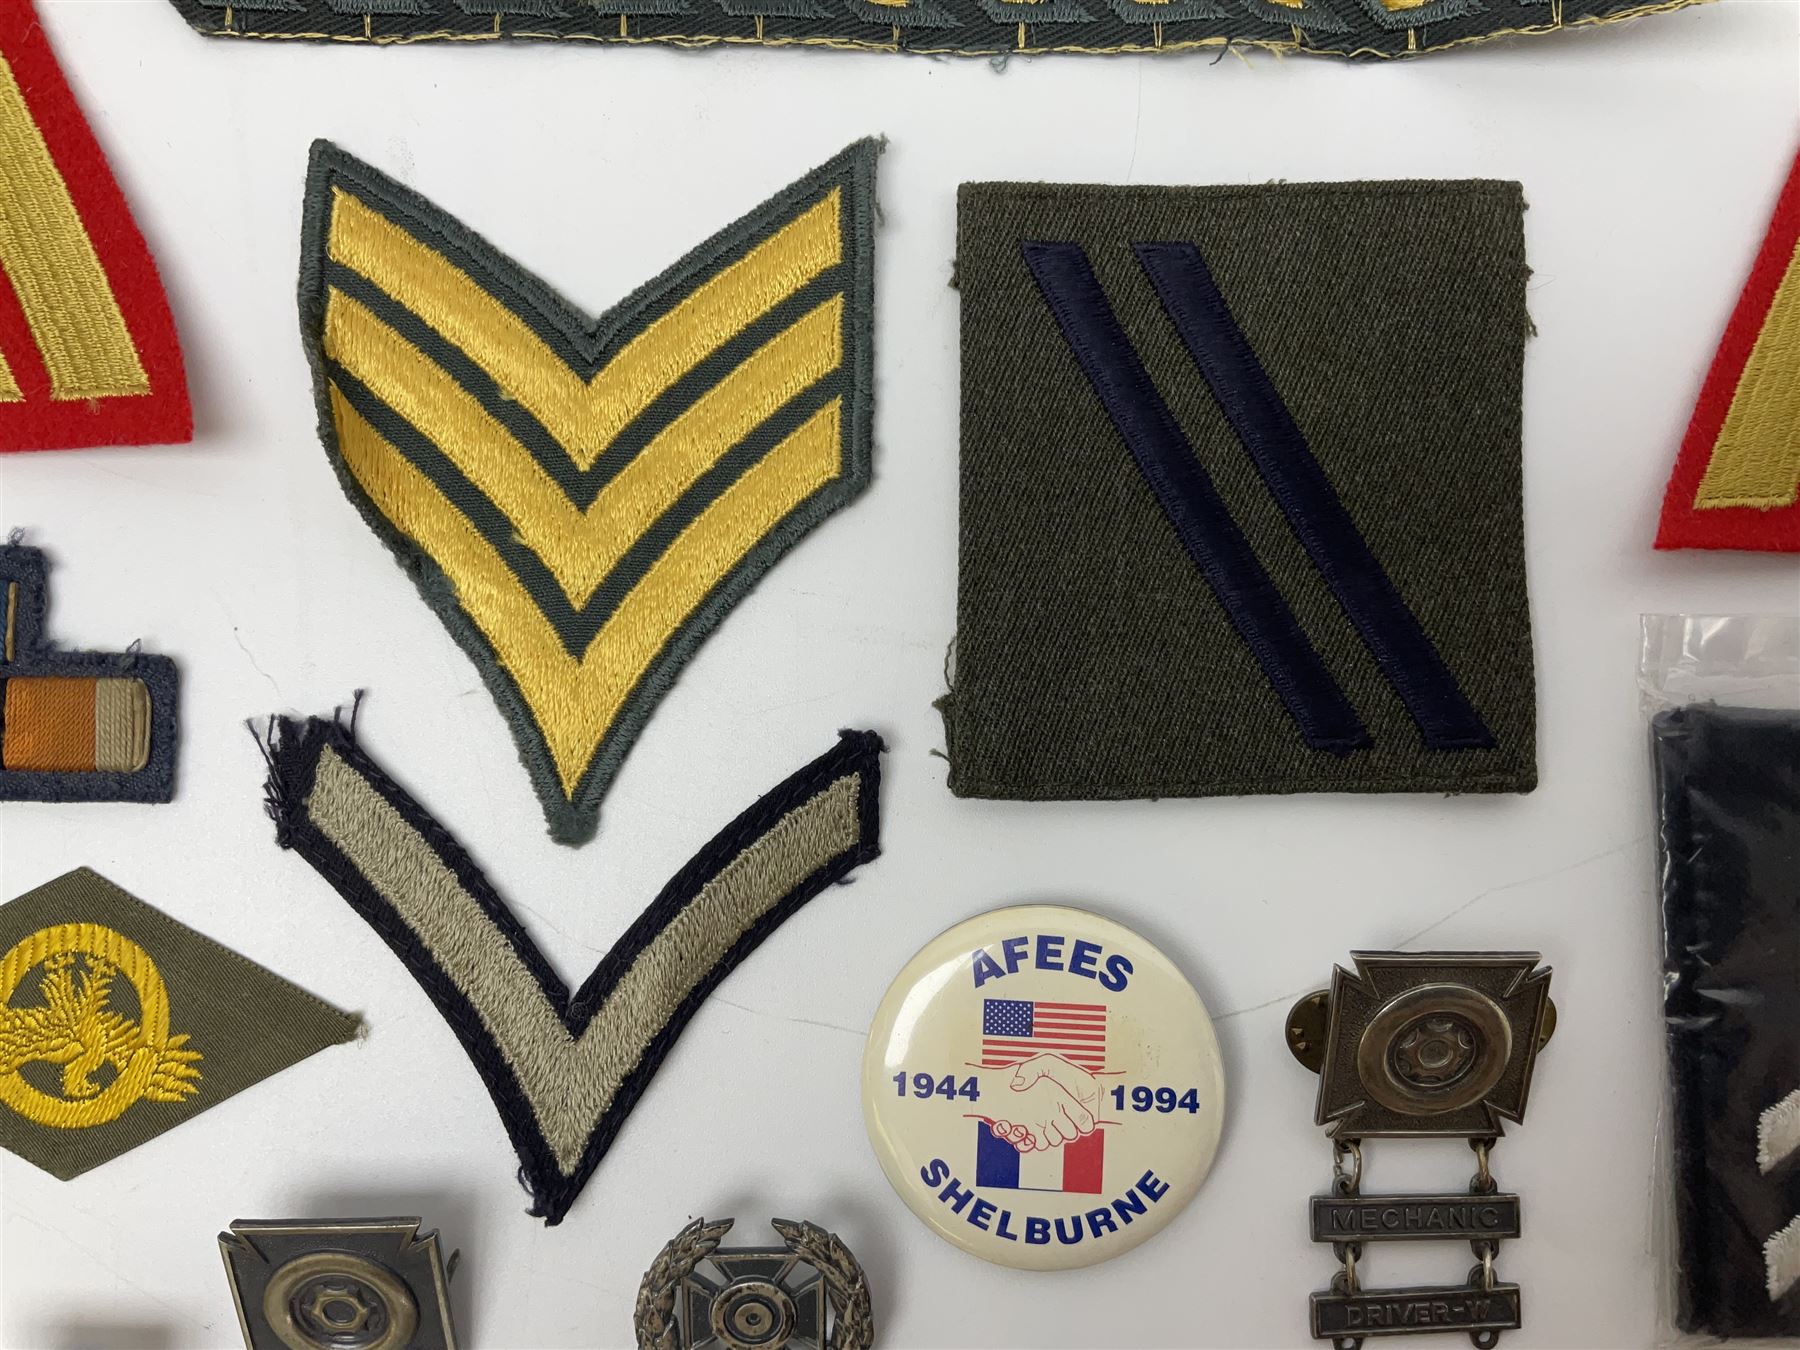 US Surgeons sterling silver wings; and quantity of other American metal and cloth badges - Image 2 of 48